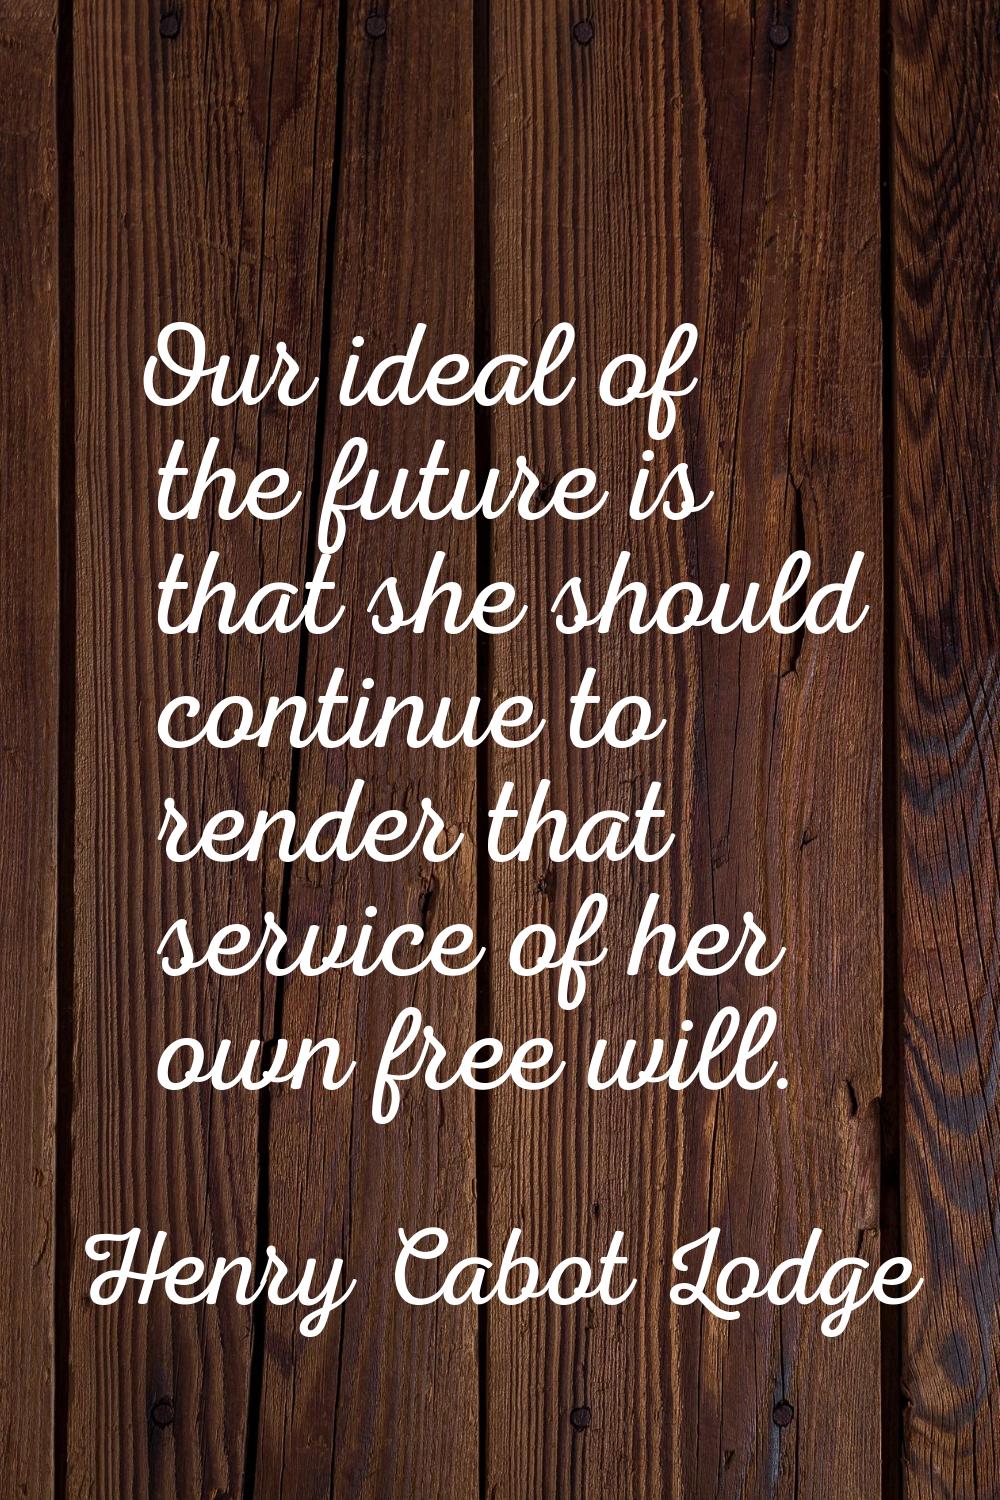 Our ideal of the future is that she should continue to render that service of her own free will.